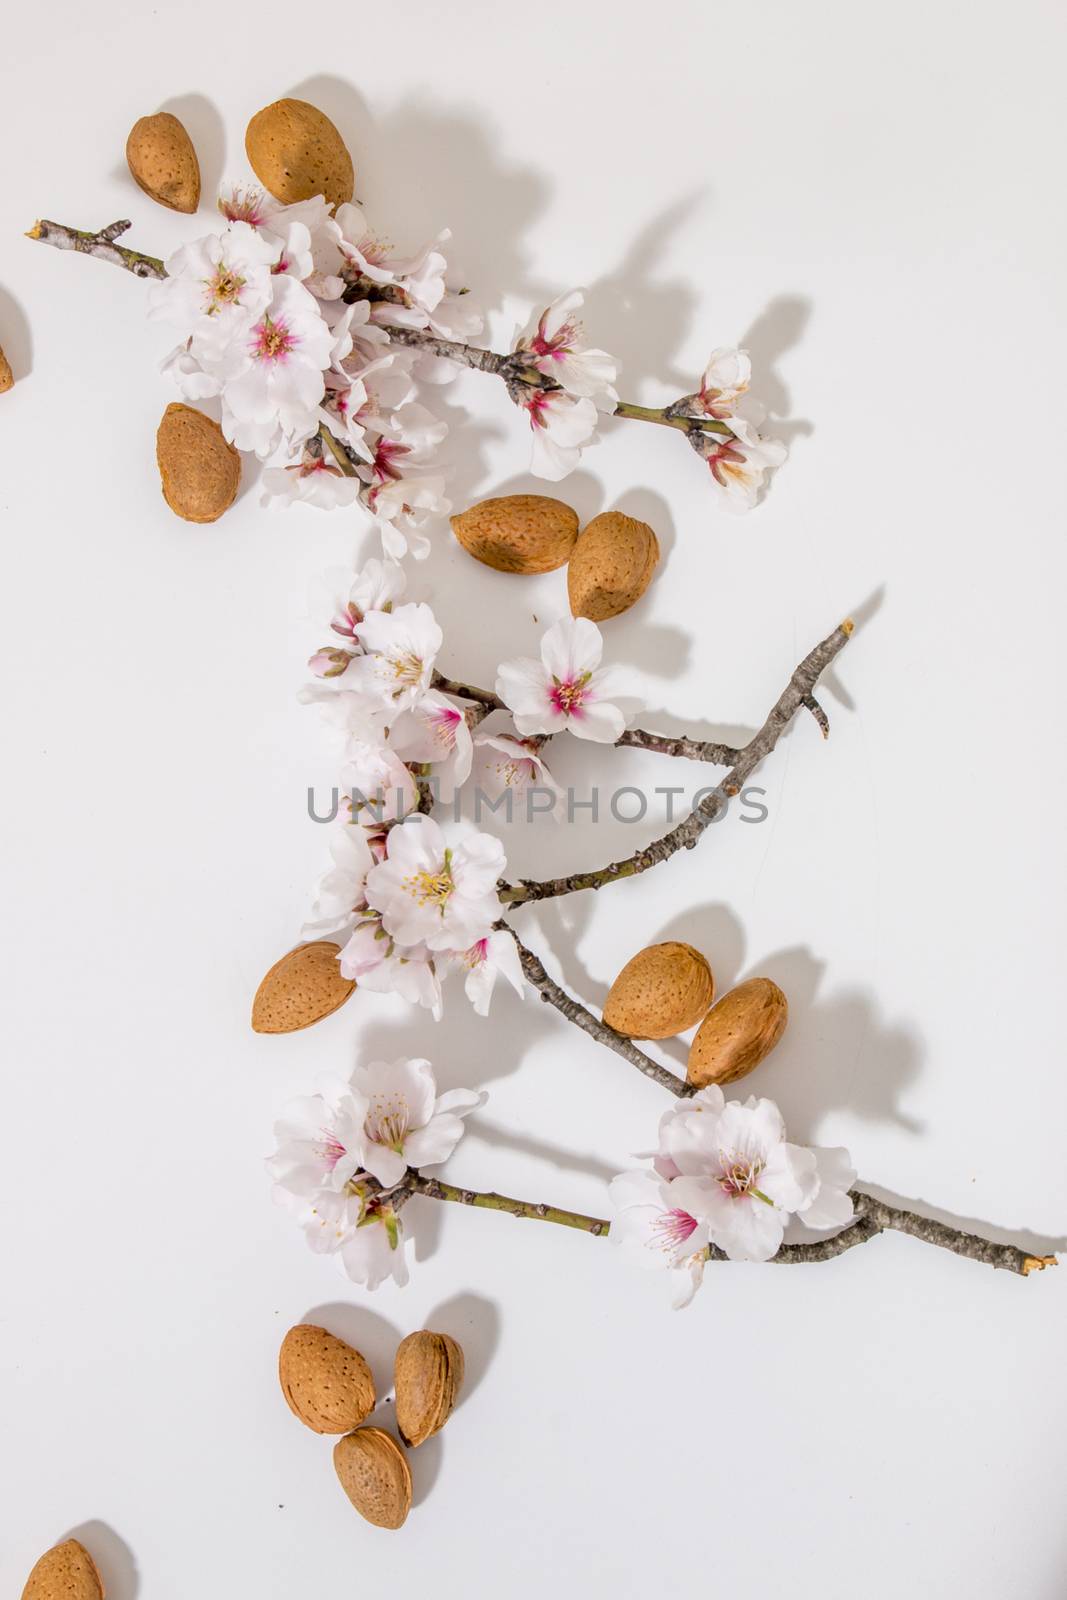 almond tree branch with almonds isolated on a white background.